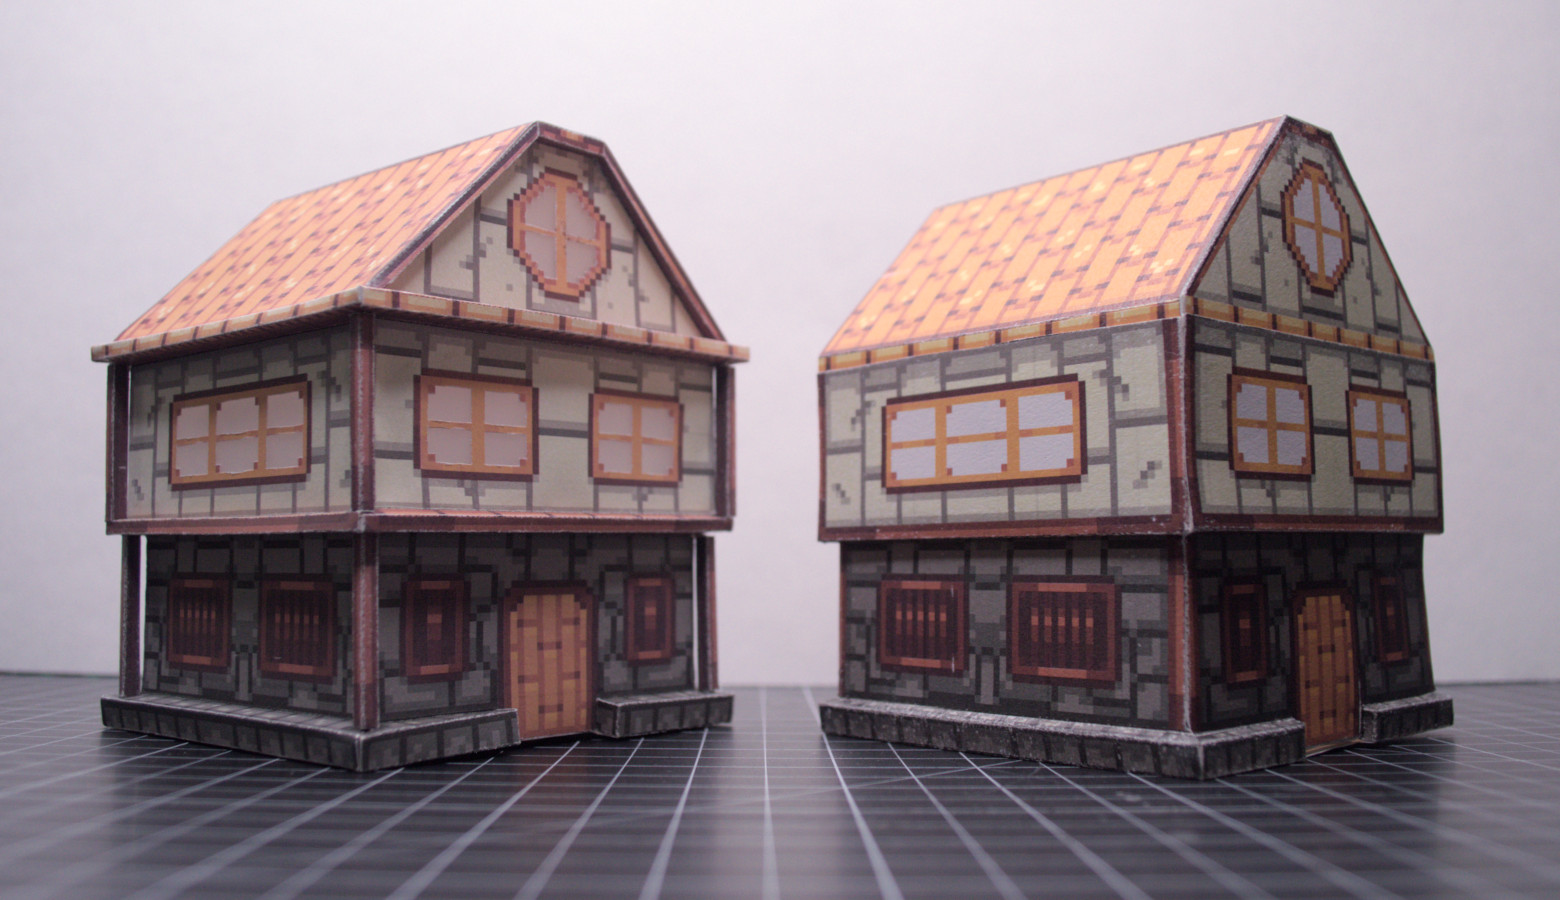 photo of the same
papercraft house as above, with another house beside it with the same
general design as the one above, but with more complex geometry, like
additional rims and columns. the old house (from above) is to the right
with the new one to the left